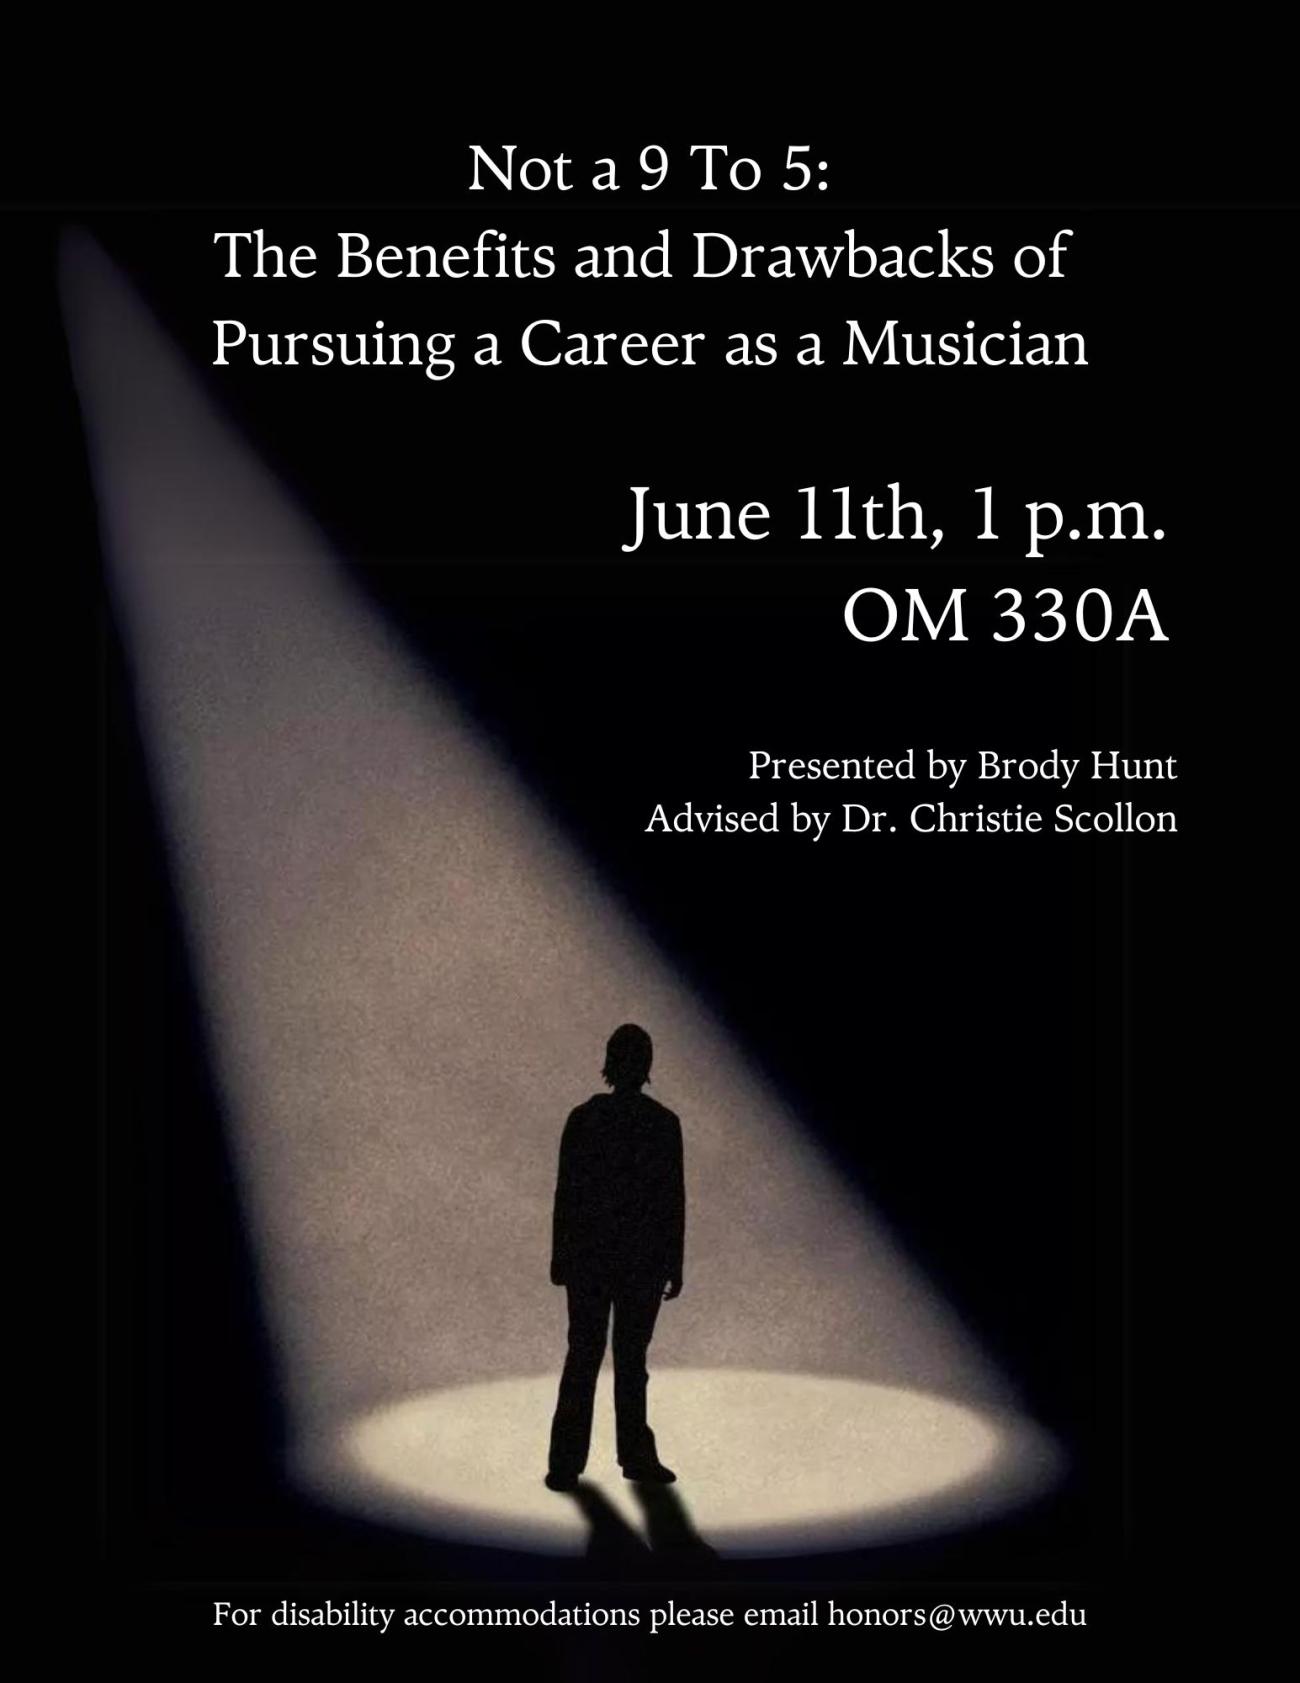 Black background containing a silhouette of a human standing underneath a spotlight shining from above. Text reads "Not a 9 to 5: The Benefits and Drawbacks of Pursuing a Career as a Musician. June 11th, 1 p.m.. OM 330A. Presented by Brody Hunt, Advised by Dr. Christie Scollon. For disability accommodations please email honors@wwu.edu.